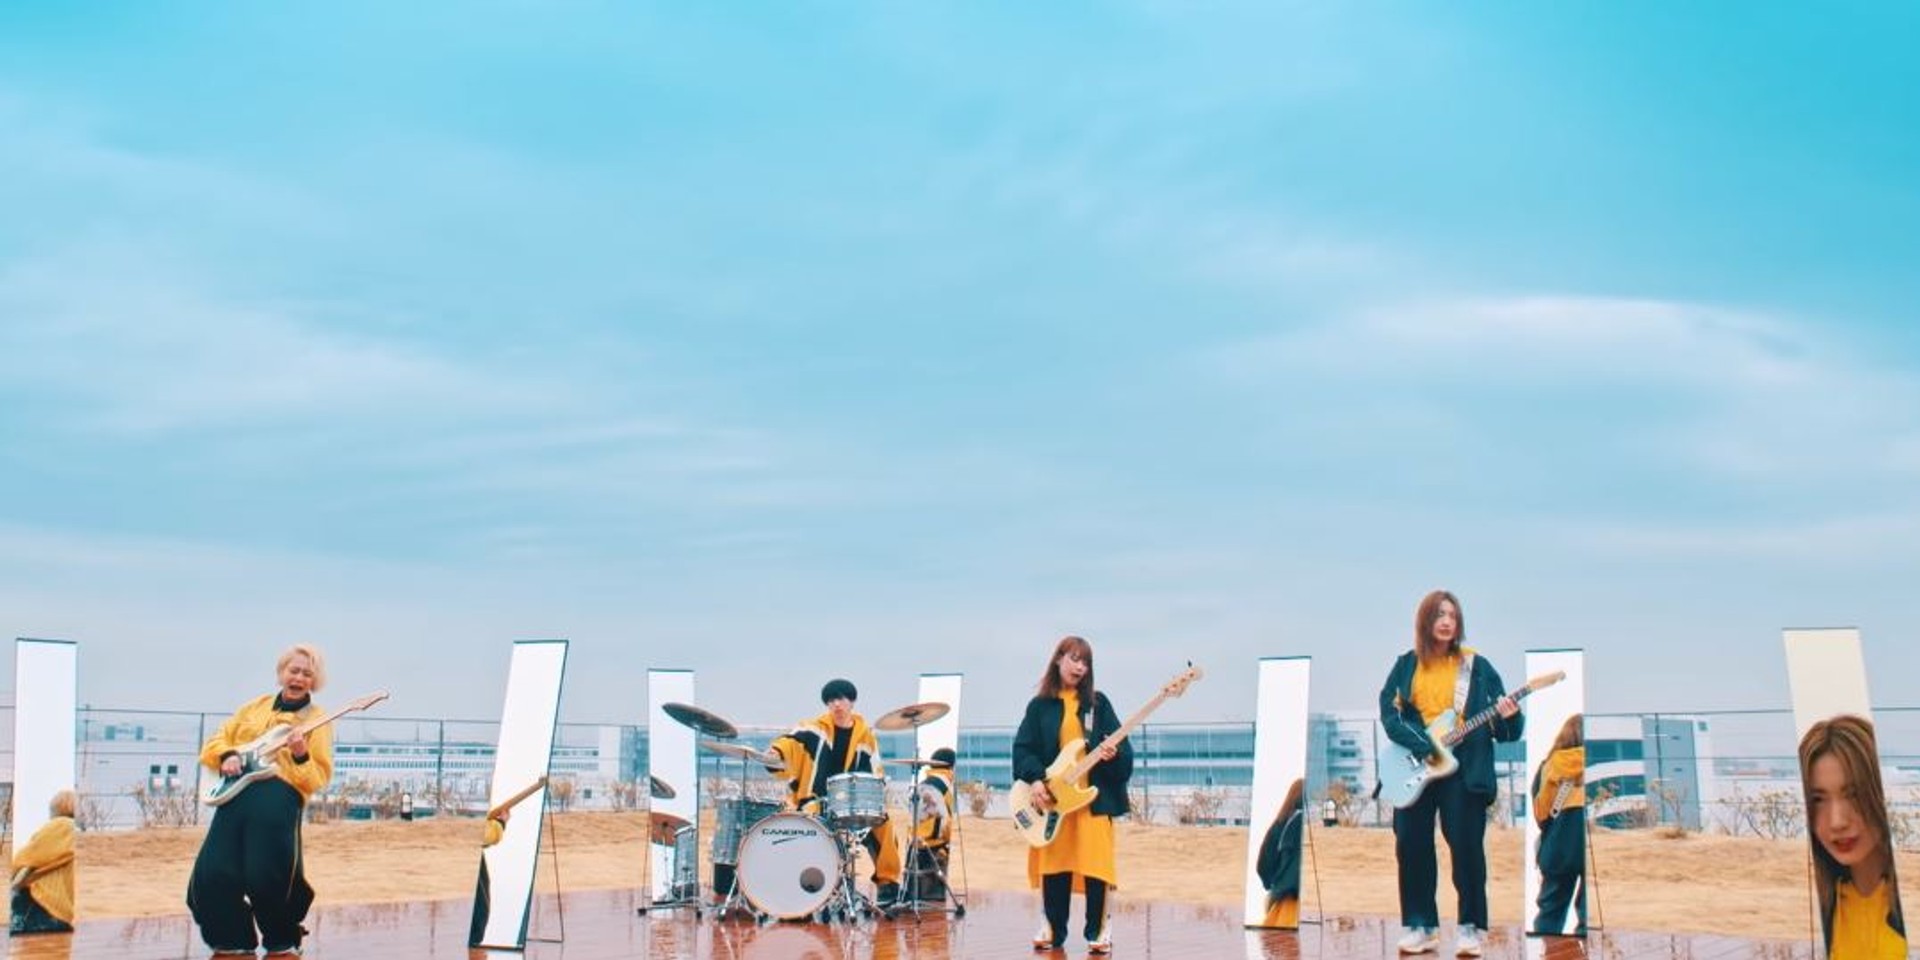 tricot play with color and mirrors in new '大発明' music video – watch